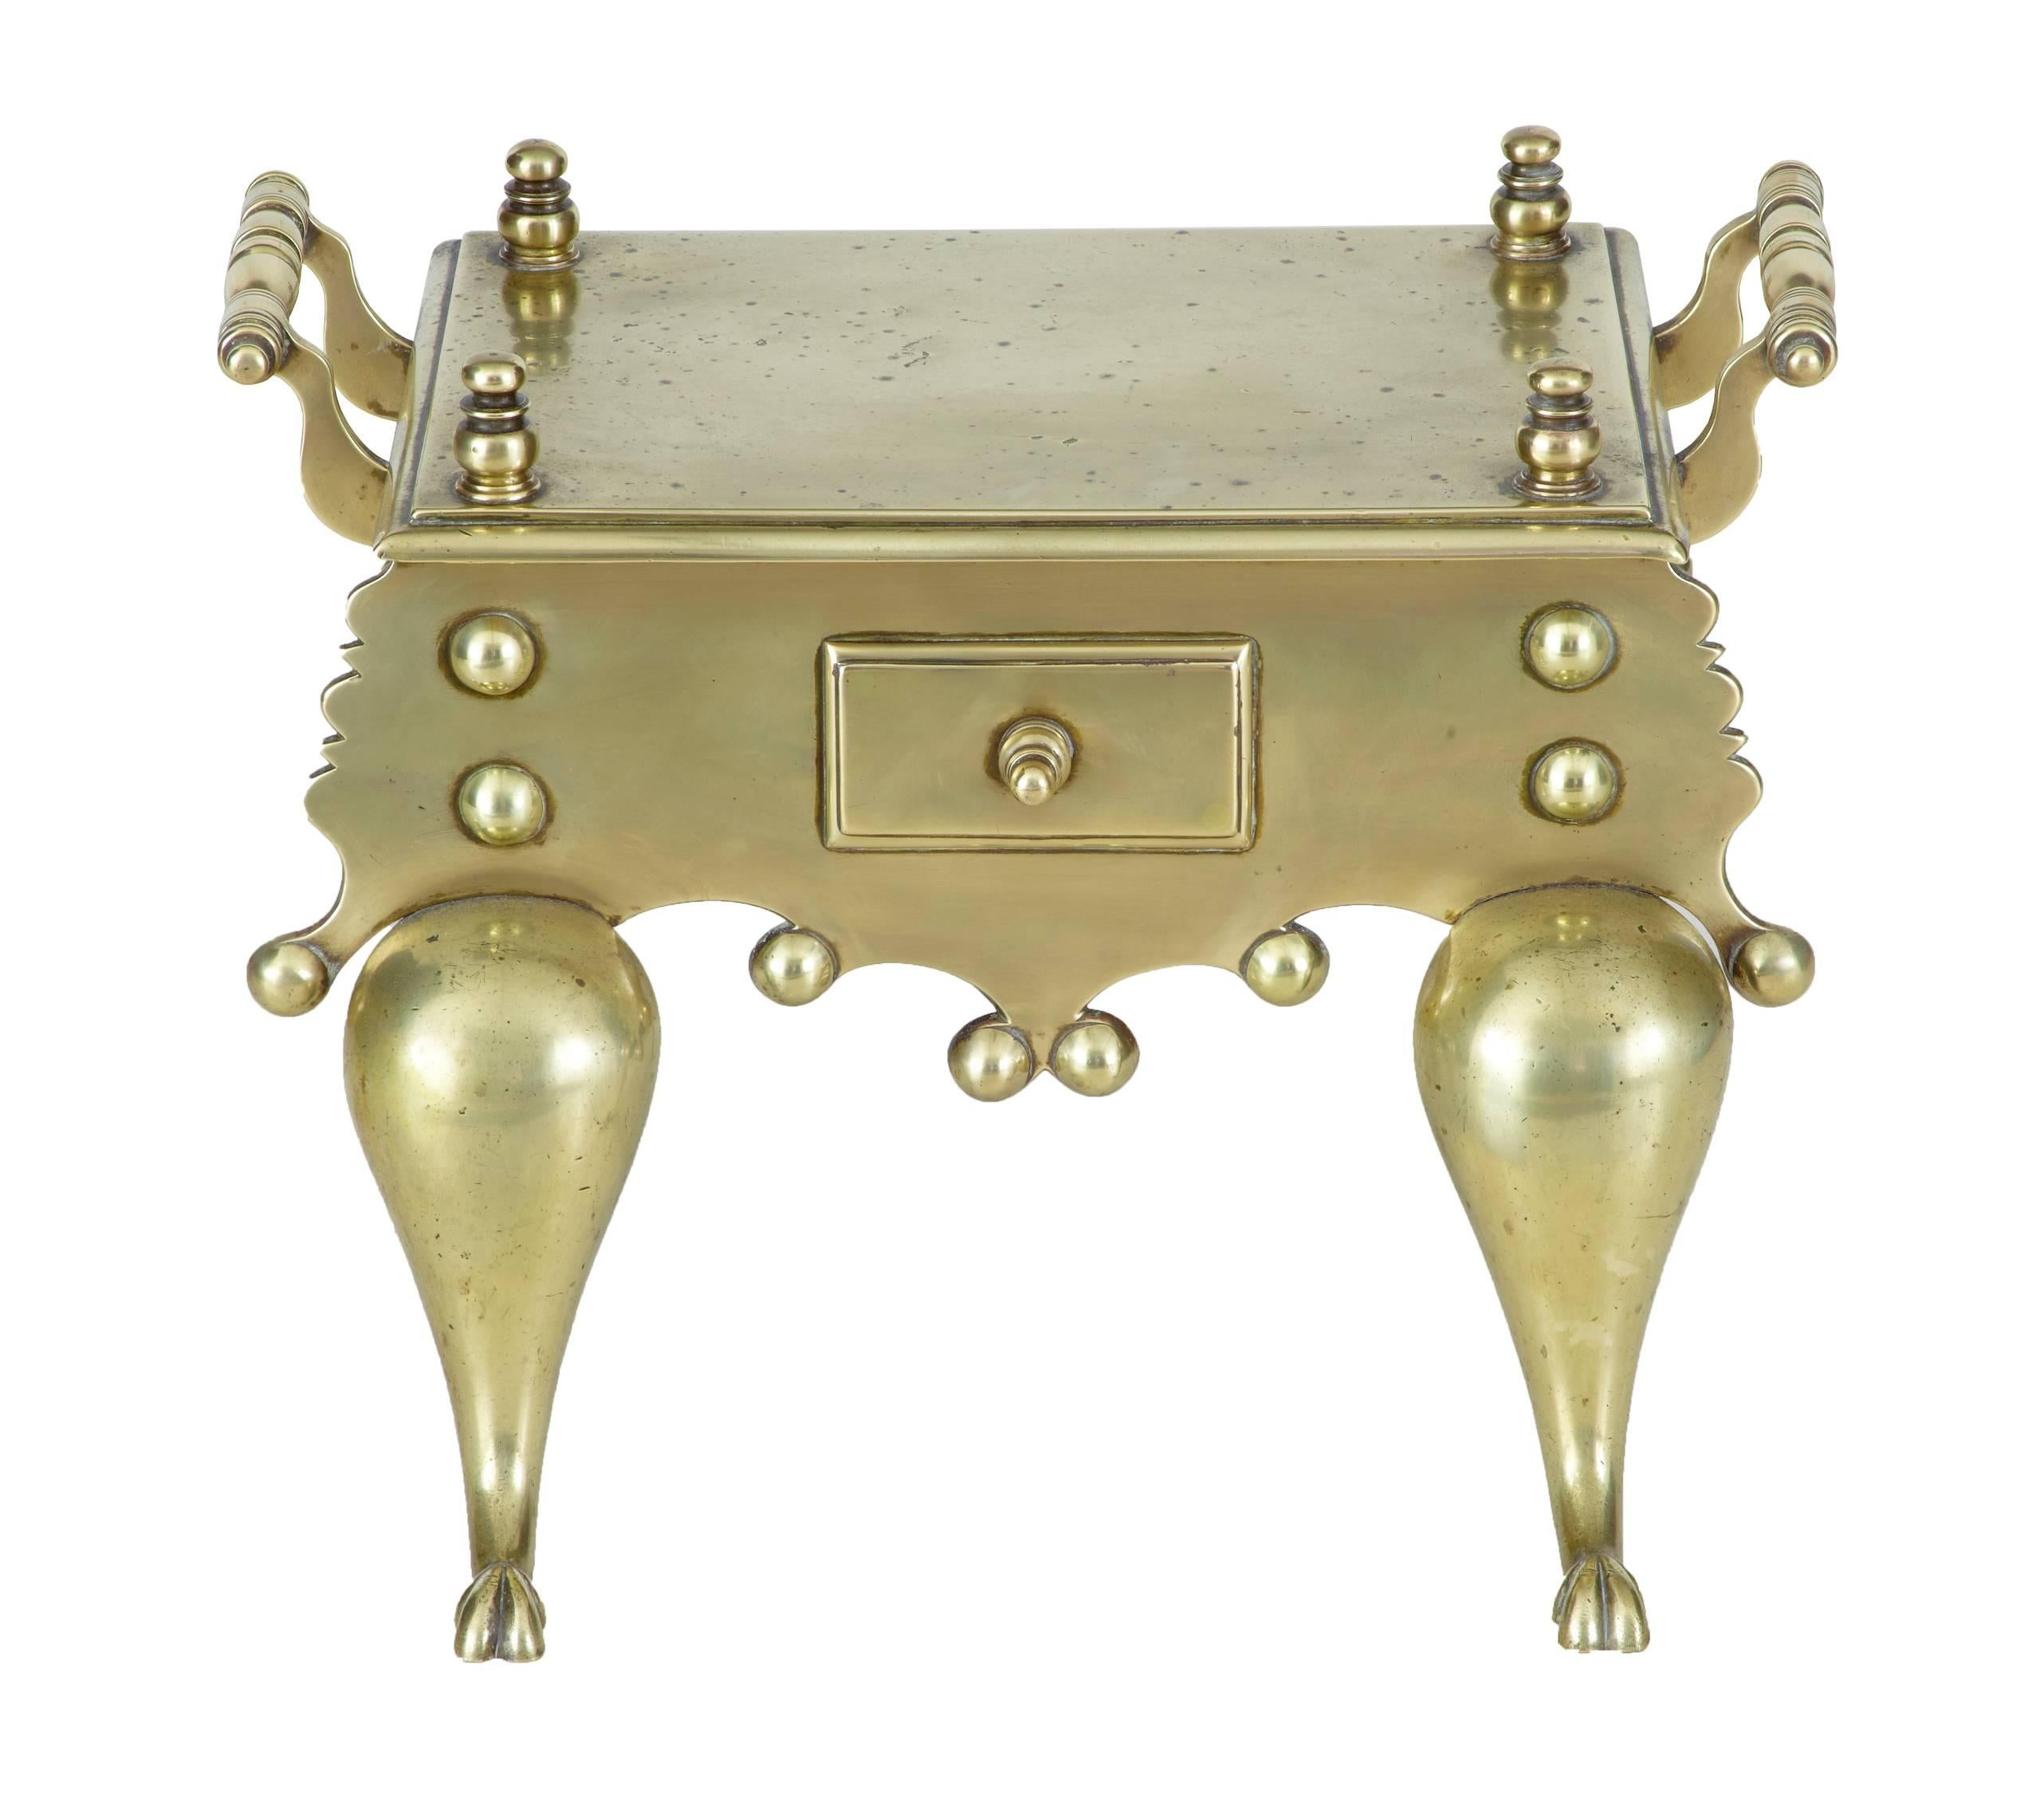 Excellent quality example of a brass and iron Victorian trivet / footman, circa 1860.
In good condition.

Turnings to the top which does have minor pitting. Handles to the side and a faux drawer to the front.
Standing on stylized paw